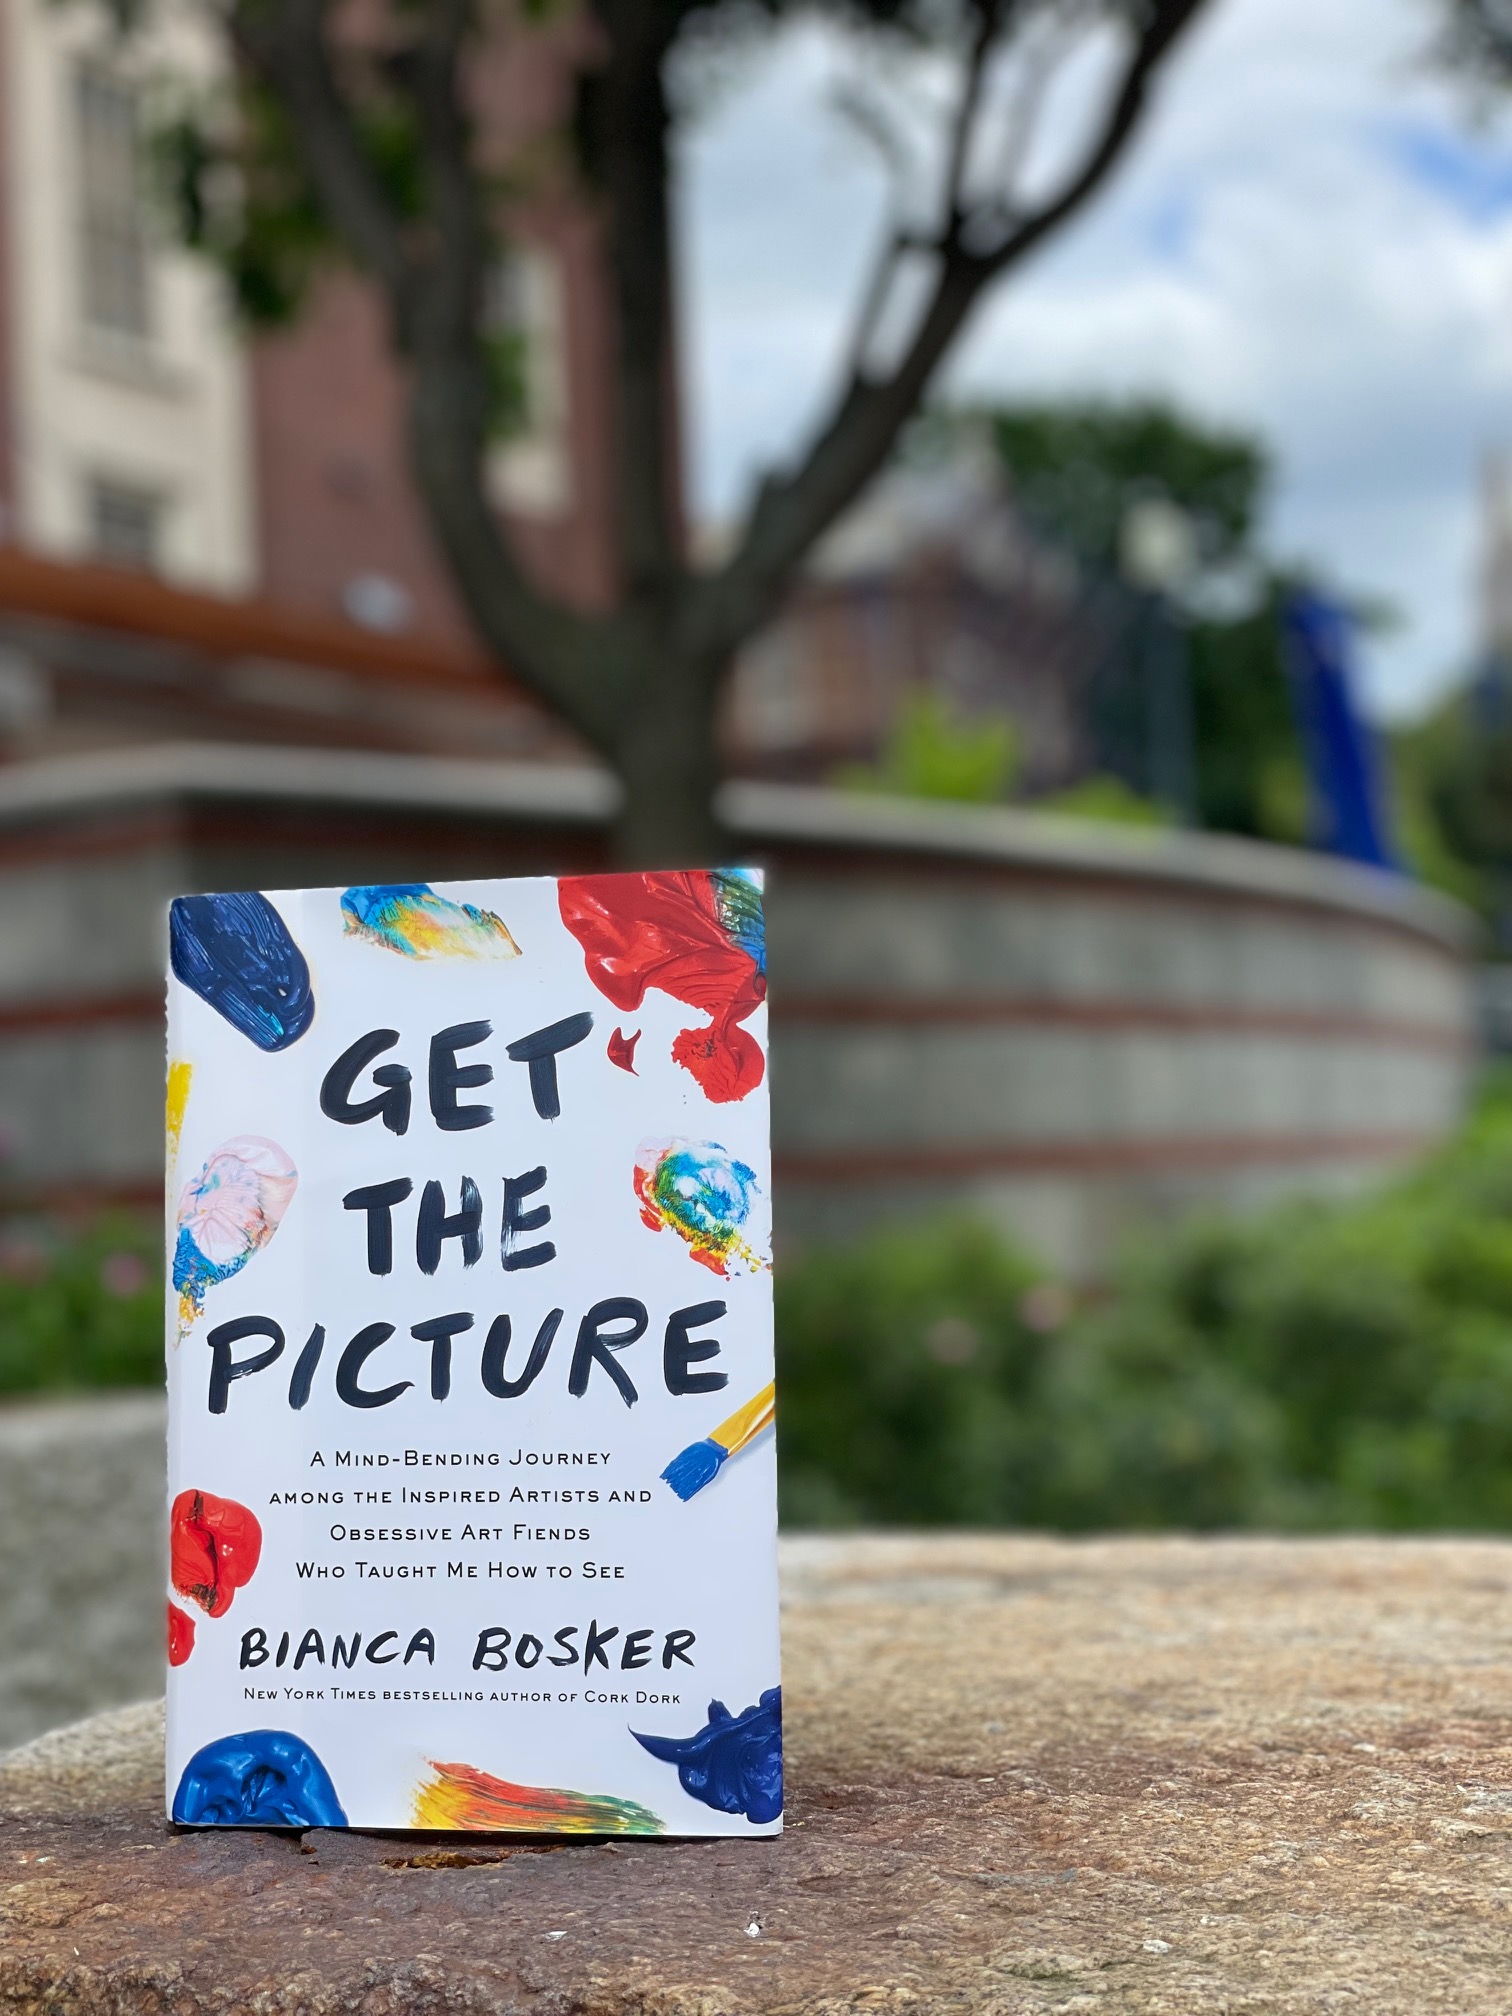 Get the Picture: A Mind-bending Journey Among the Inspired Artists and Obsessive Art Fiends Who Taught Me How to See”